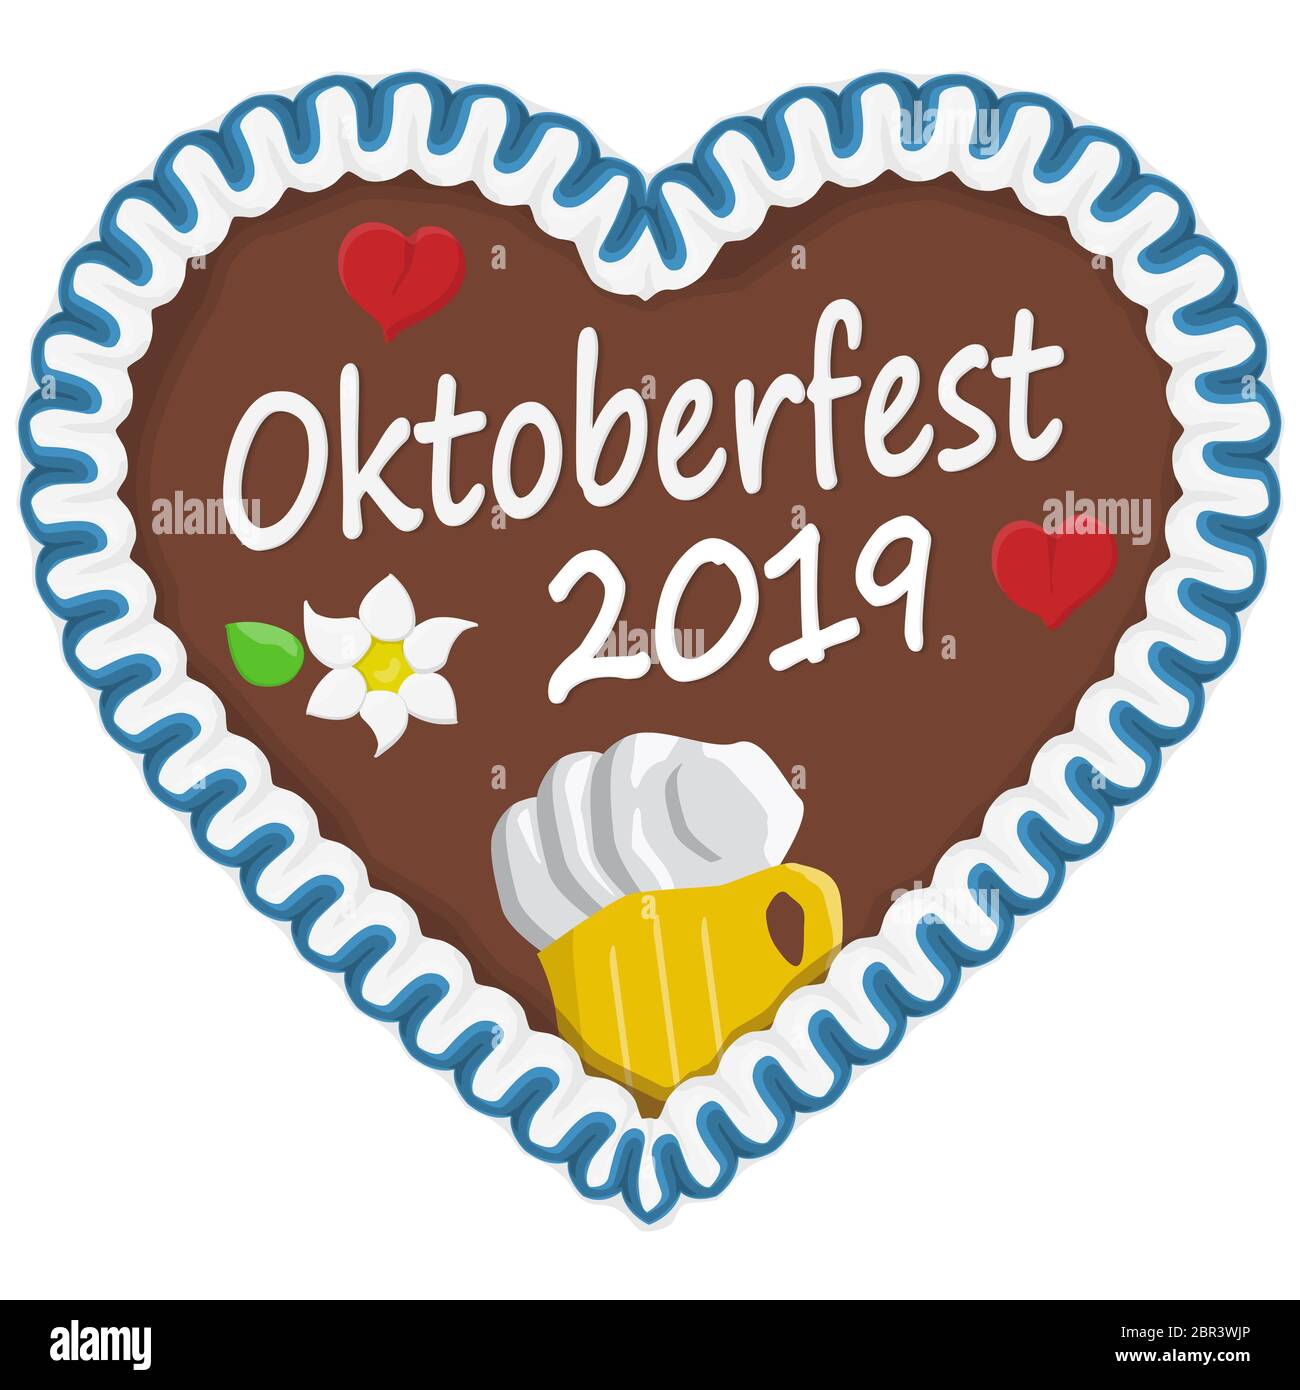 illustrated gingerbread heart with text in german for Oktoberfest 2019 time Stock Photo